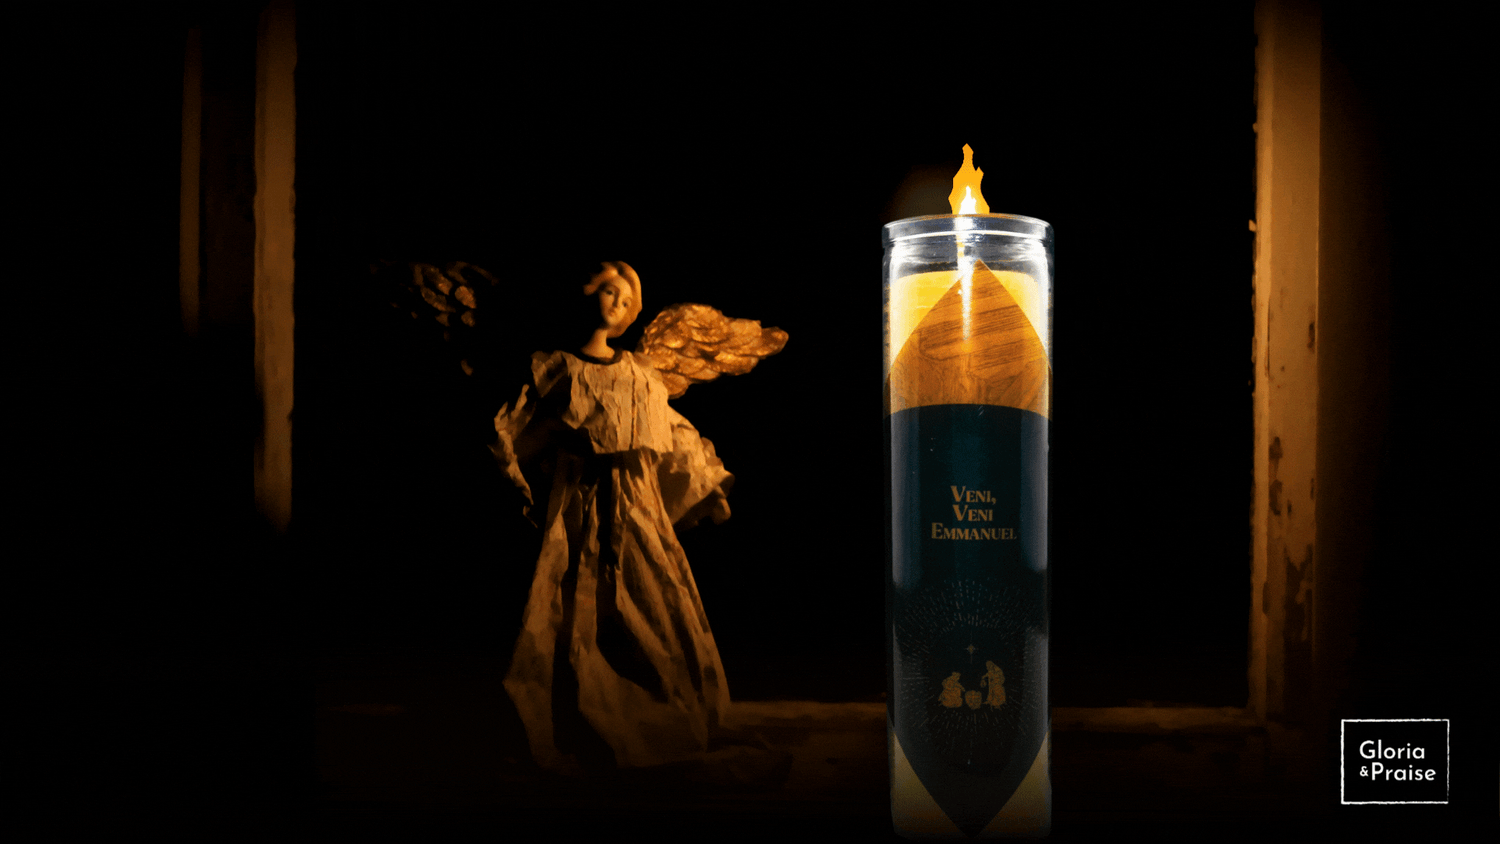 Tradition of the Christmas Eve Vigil Candle